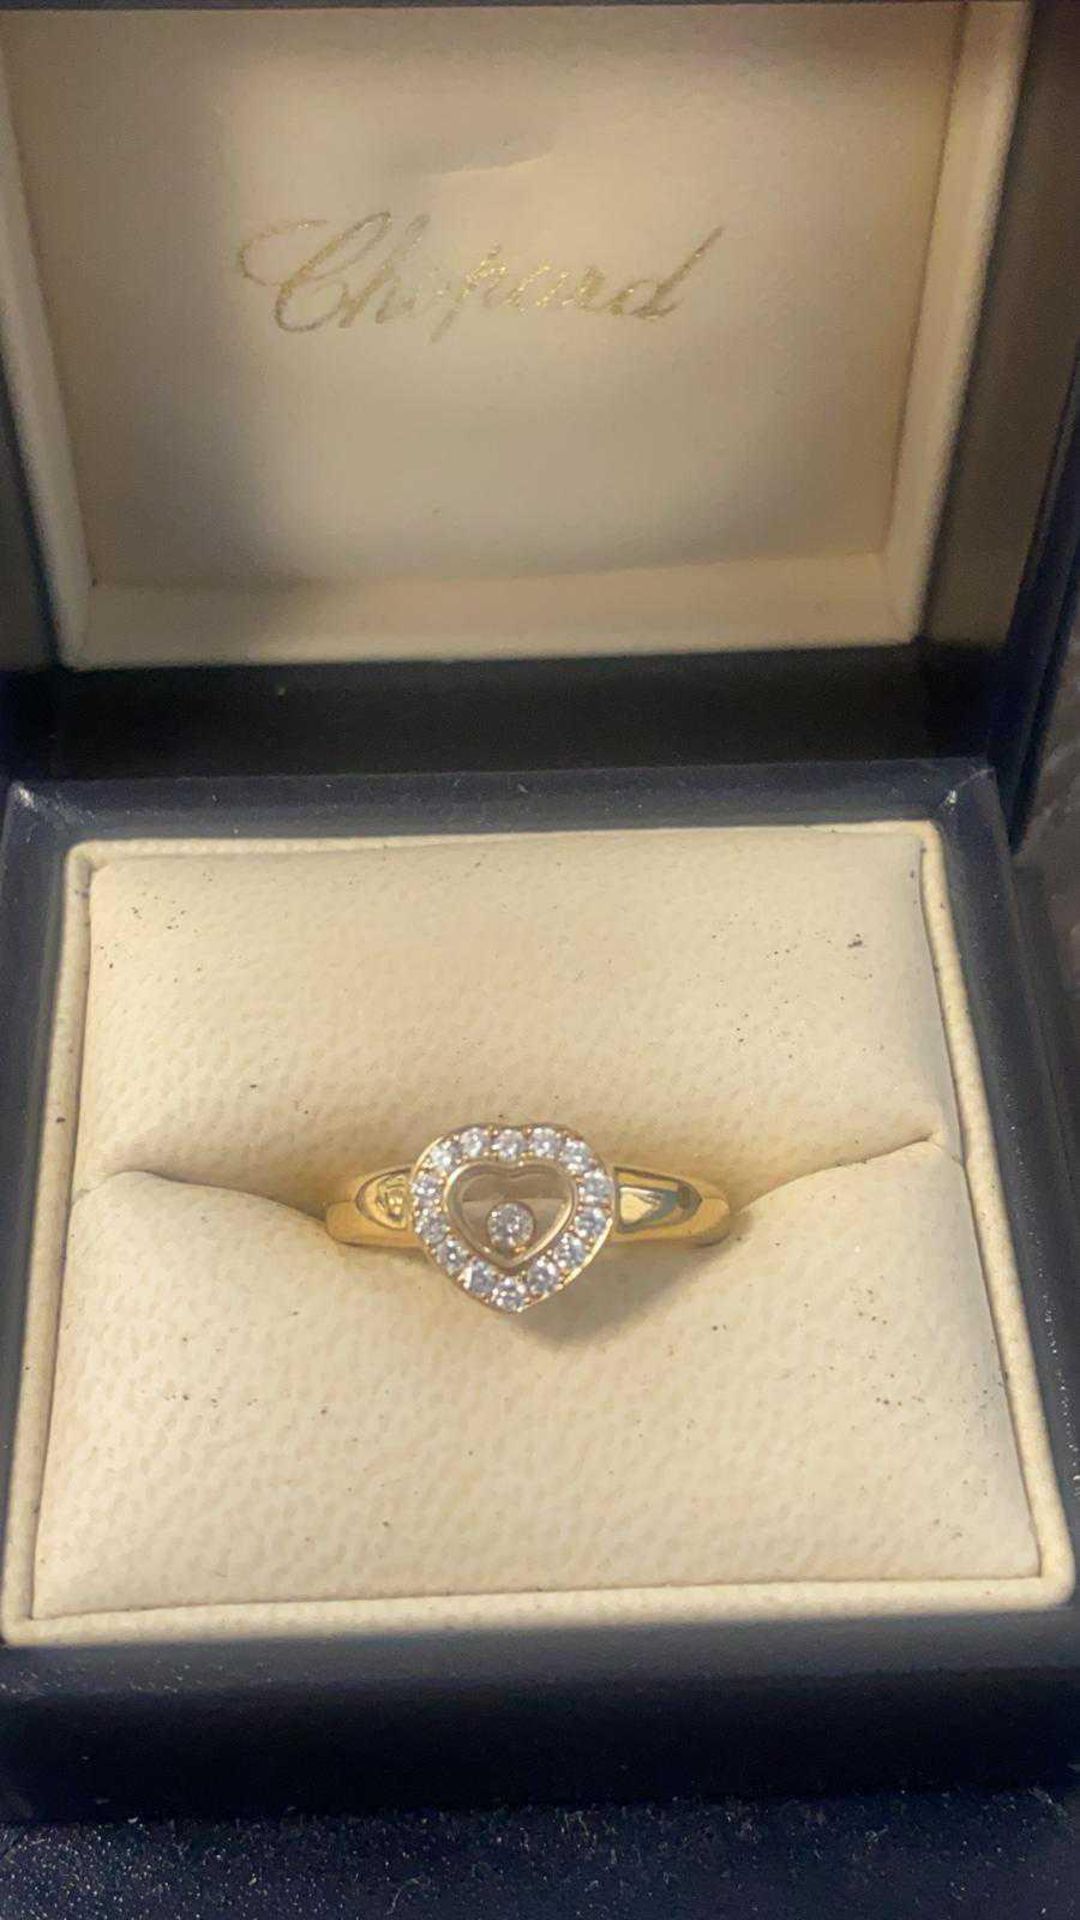 RRP £1500 Chopard 18ct Happy Diamond Ring (Appraisals Available On Request) (Pictures For